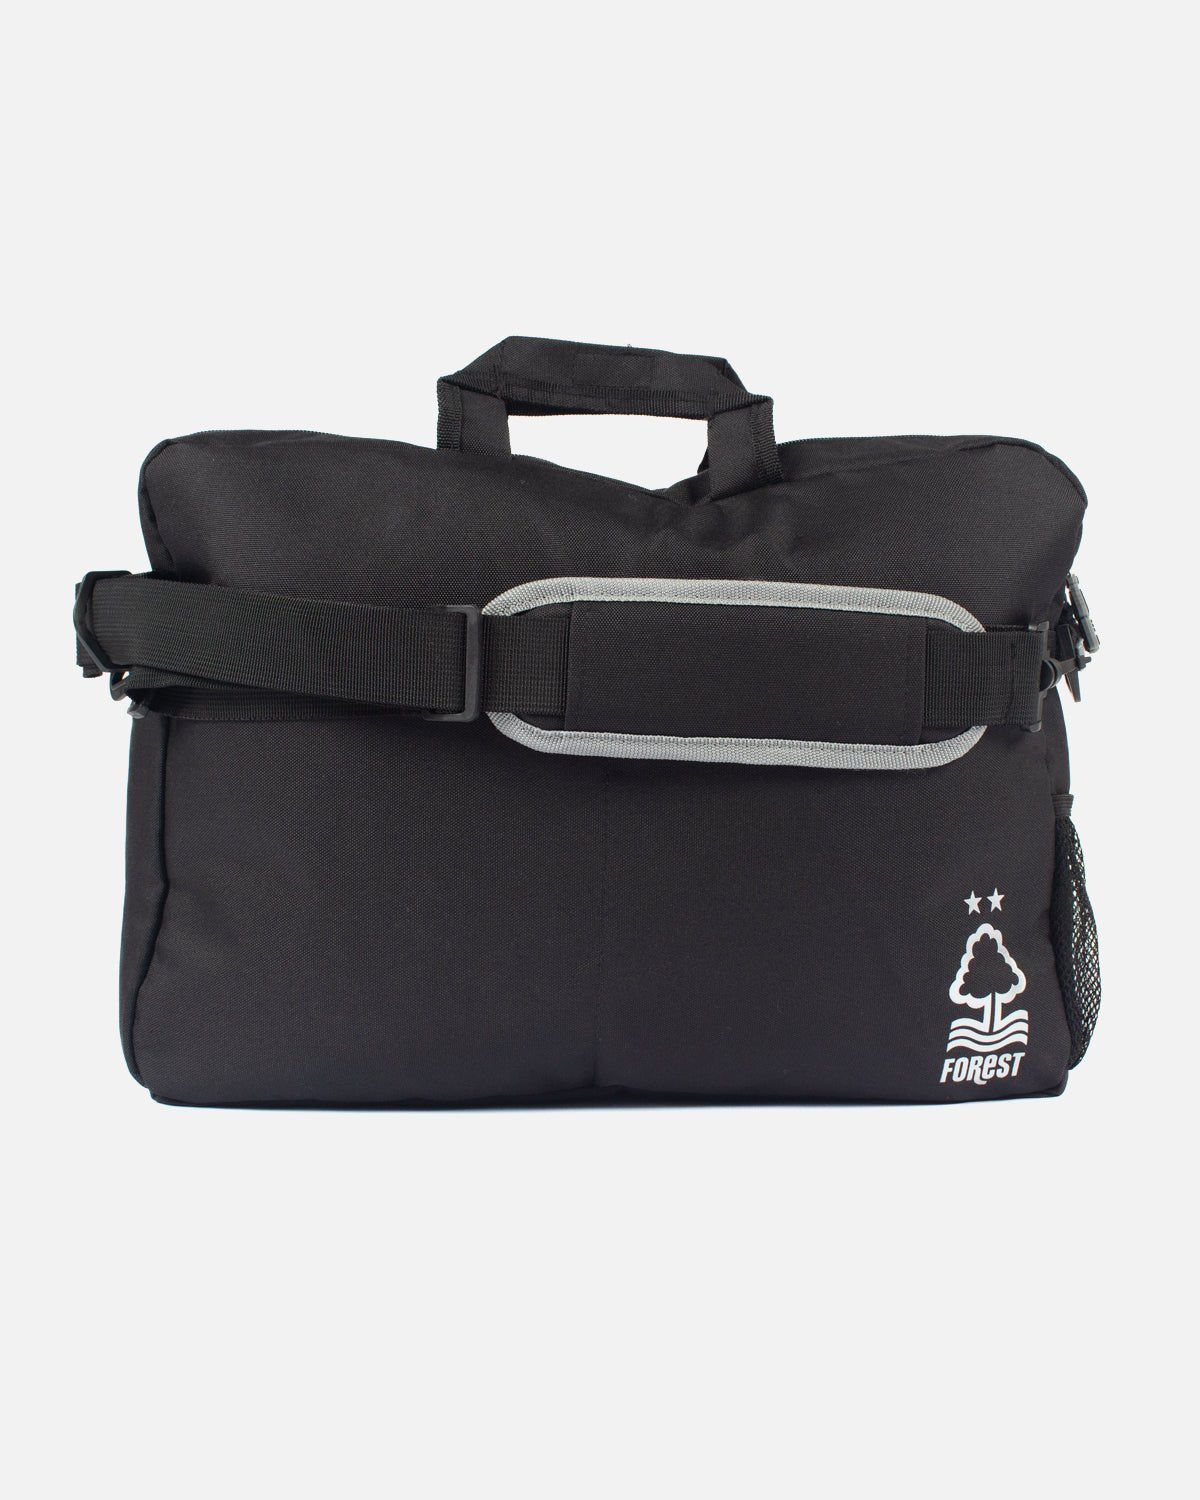 NFFC Recycled Laptop Bag - Nottingham Forest FC